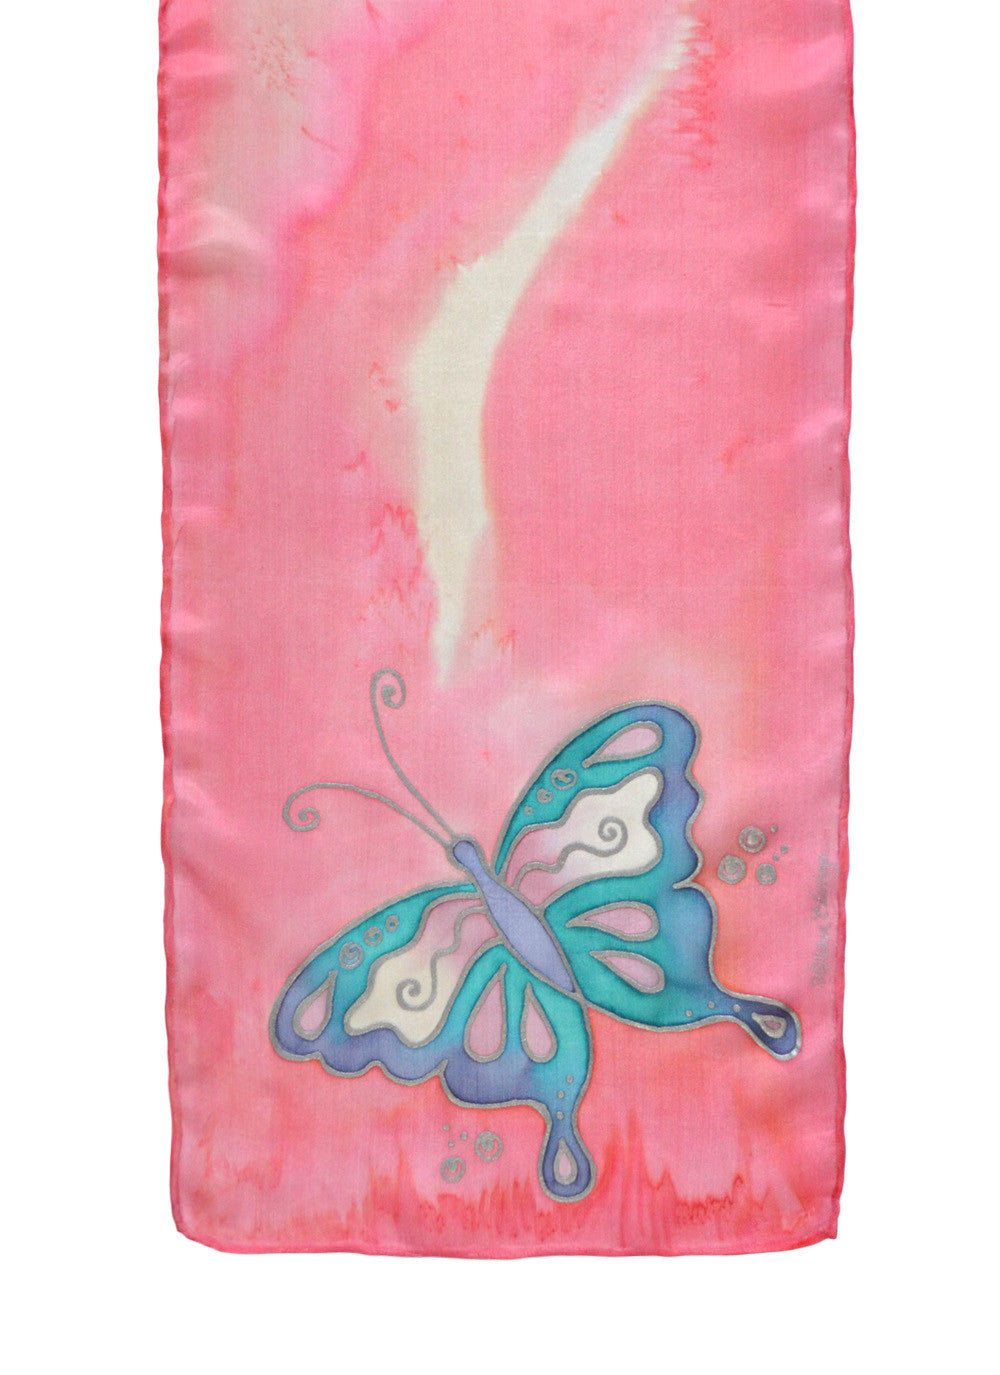 Silk scarf with butterfly design shown in carnation pink